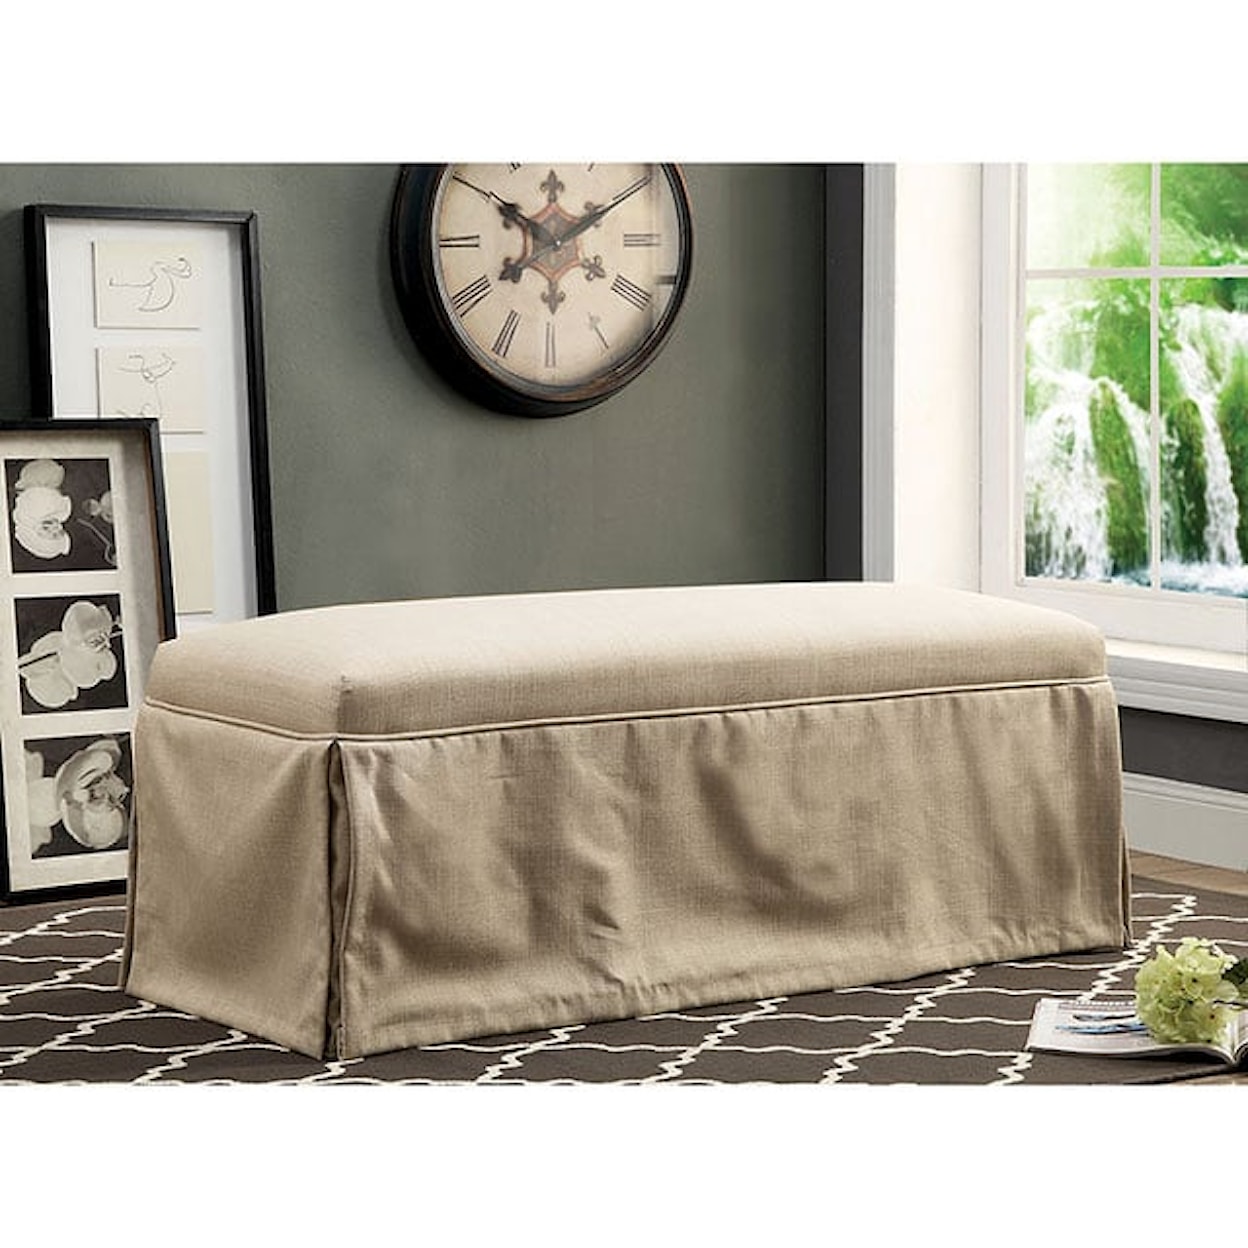 Furniture of America Kortrijk  Skirted Bench with Welting Trim